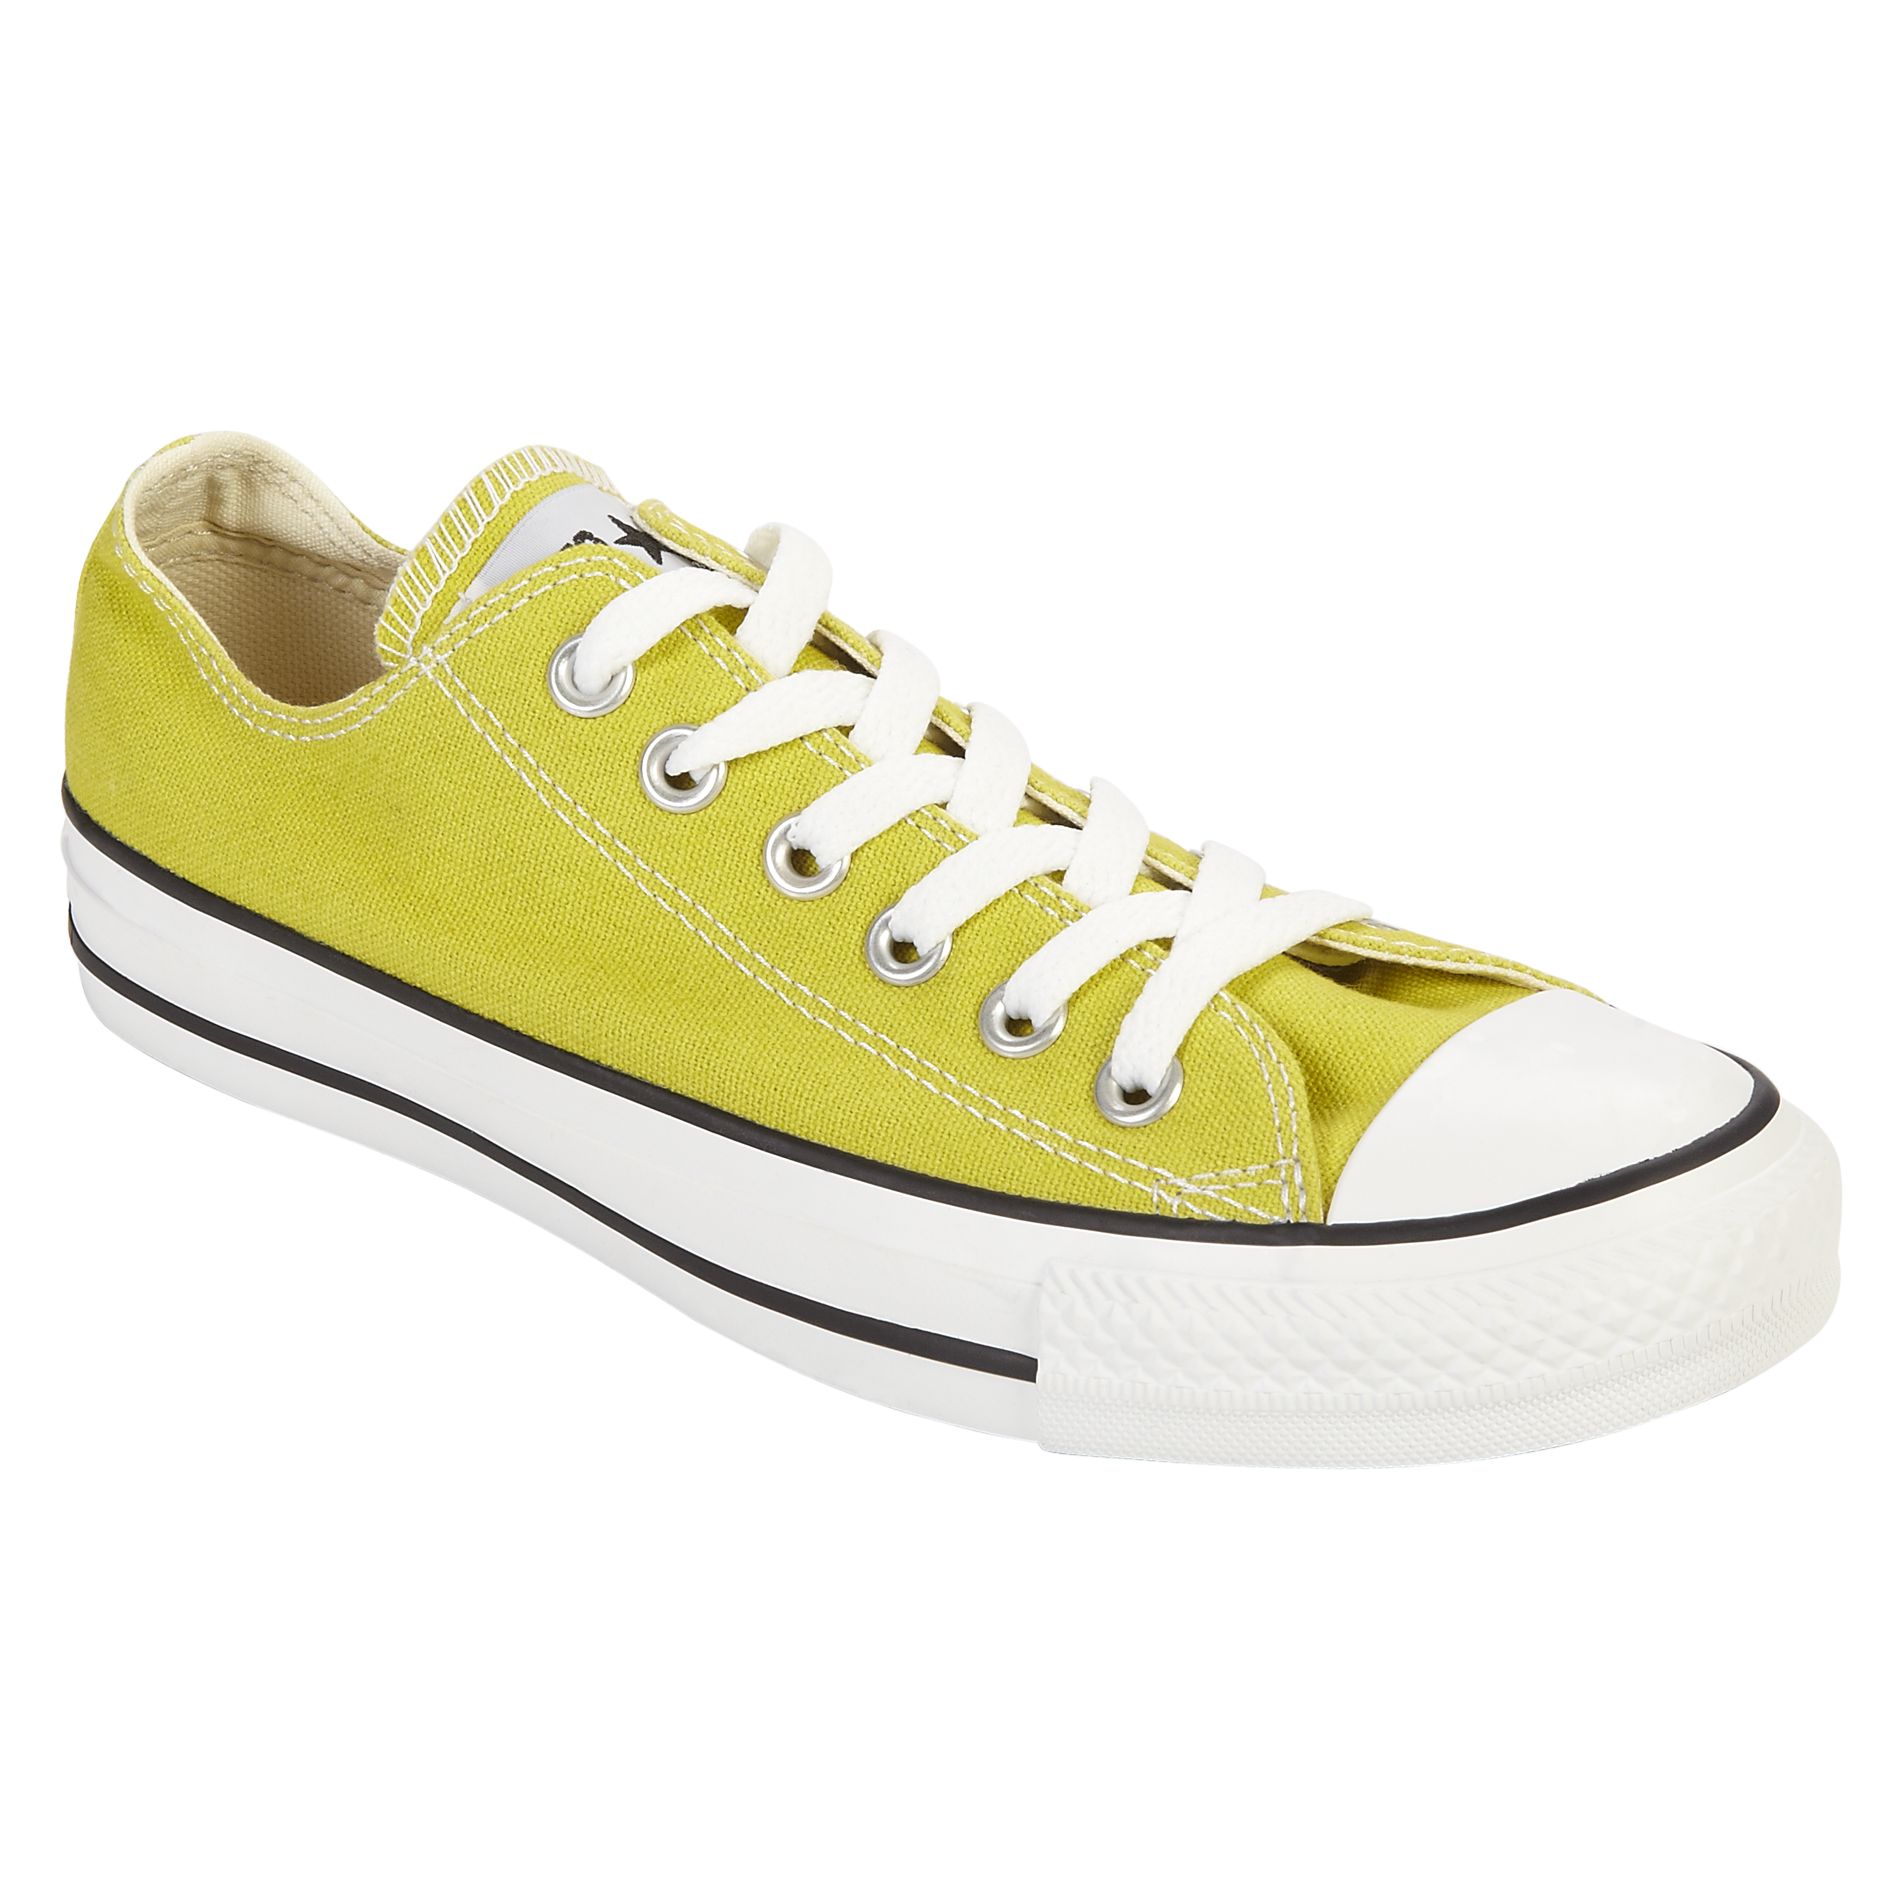 Converse Women's Athletic Casual Shoe Chuck Taylor All Star Ox - Warm Olive